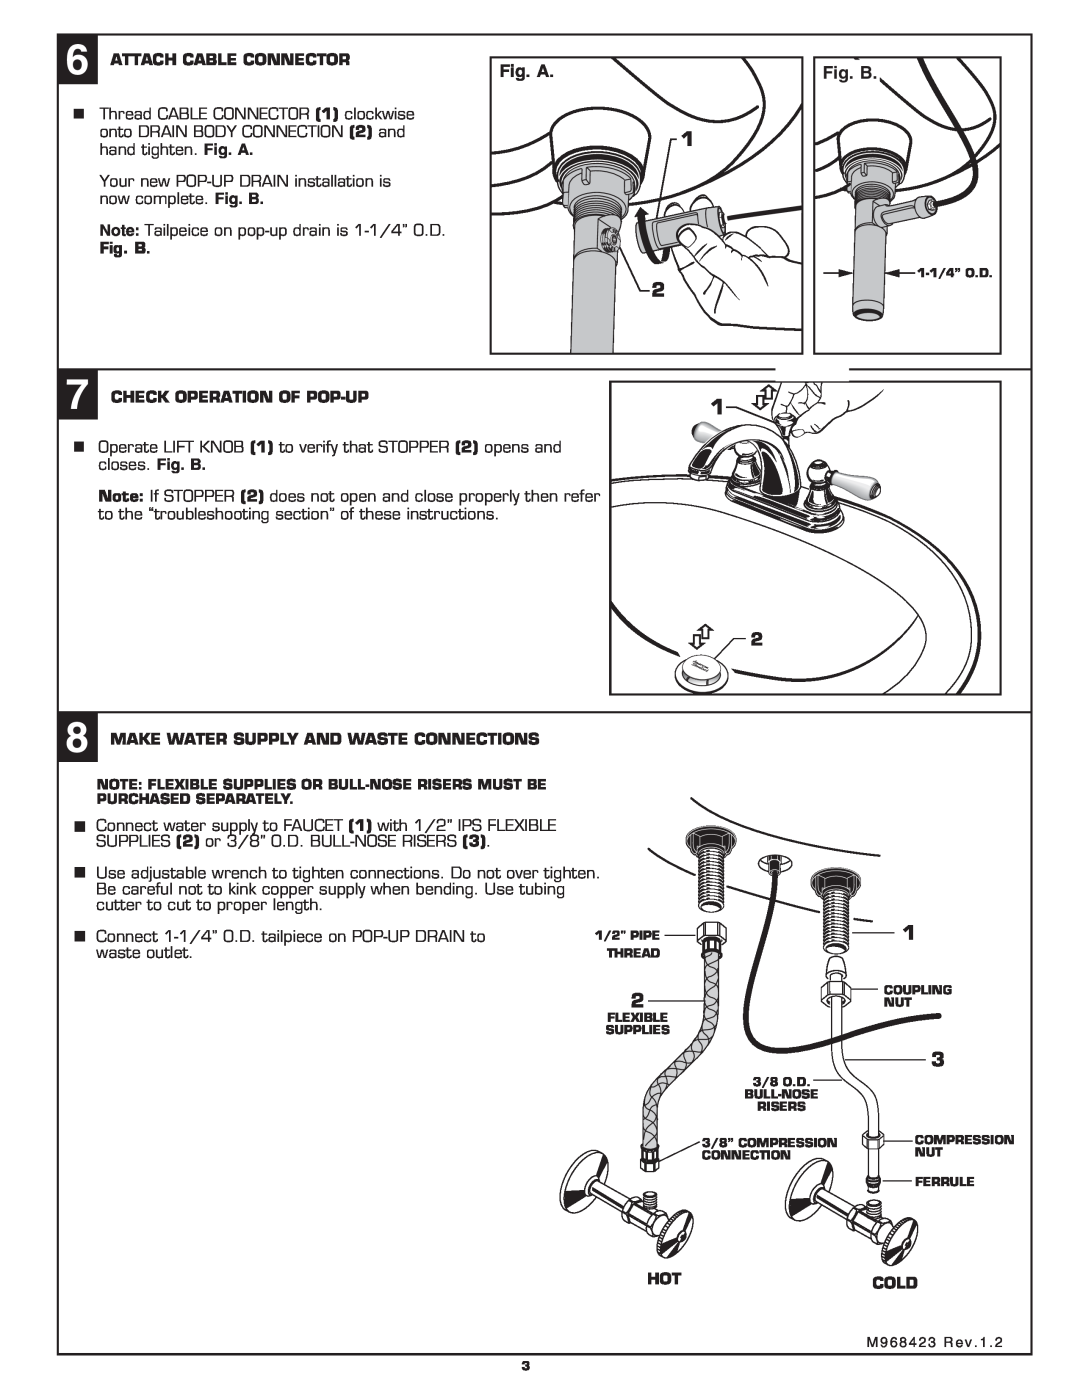 American Standard 2904 Fig. A, Attach Cable Connector, Check Operation Of Pop-Up, closes. Fig. B, Hotcold 